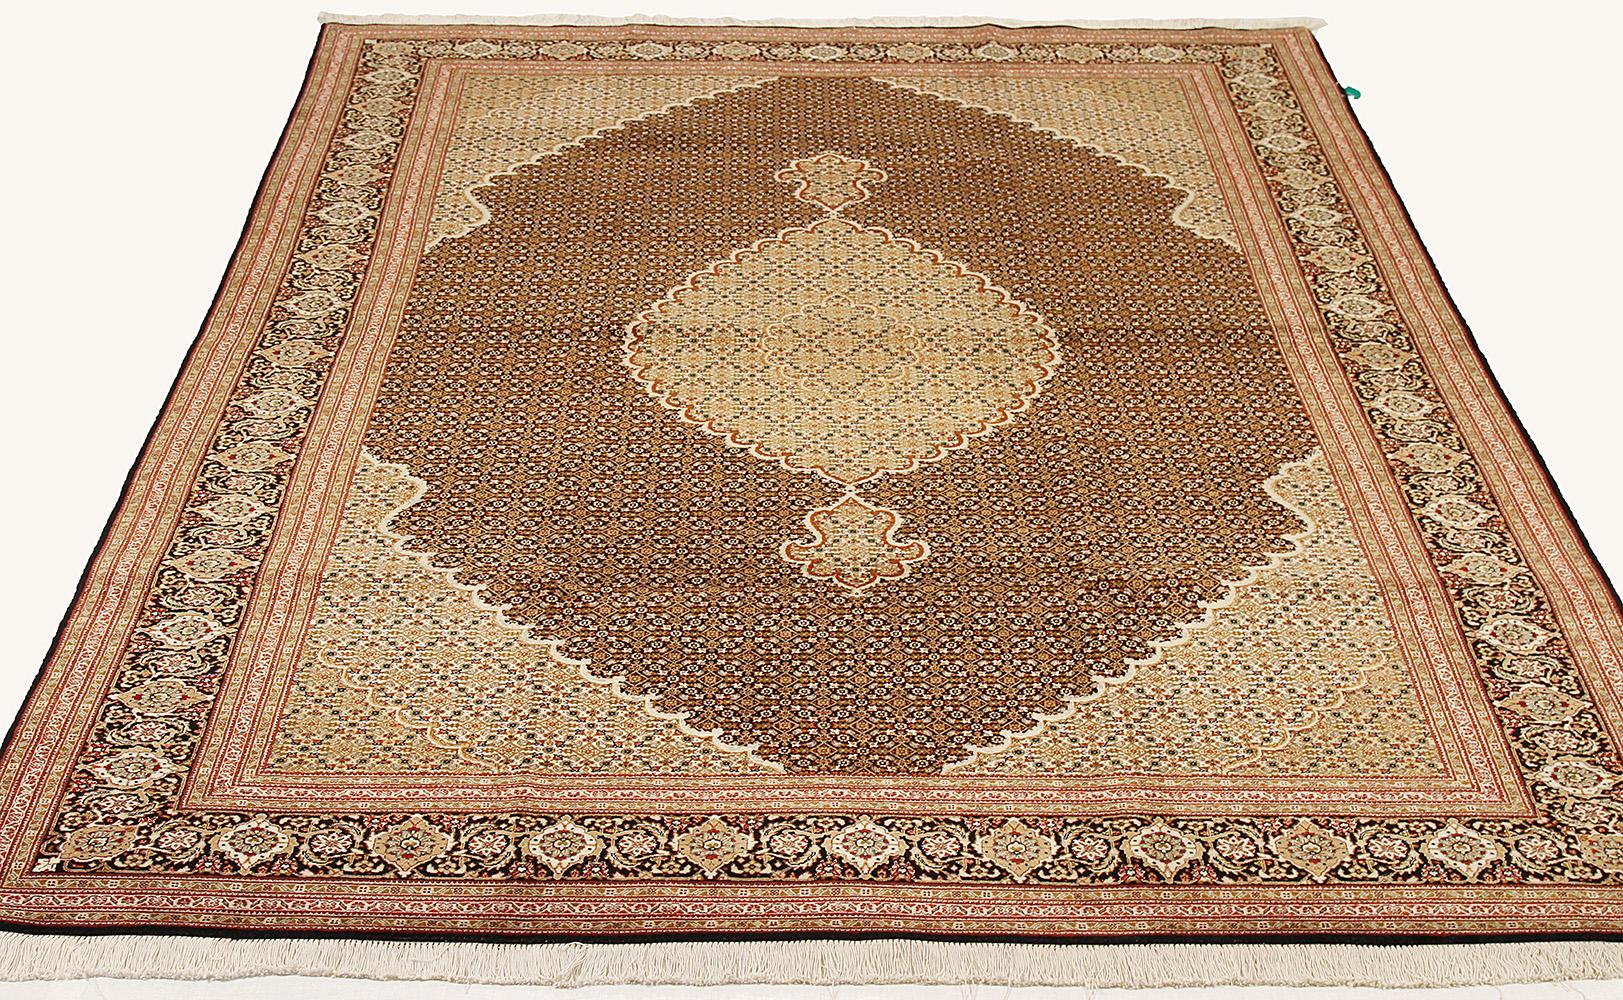 Contemporary Persian rug handwoven from the finest sheep’s wool and colored with all-natural vegetable dyes that are safe for humans and pets. It’s a traditional Tabriz weaving featuring a lovely ensemble of floral designs in white and brown over a